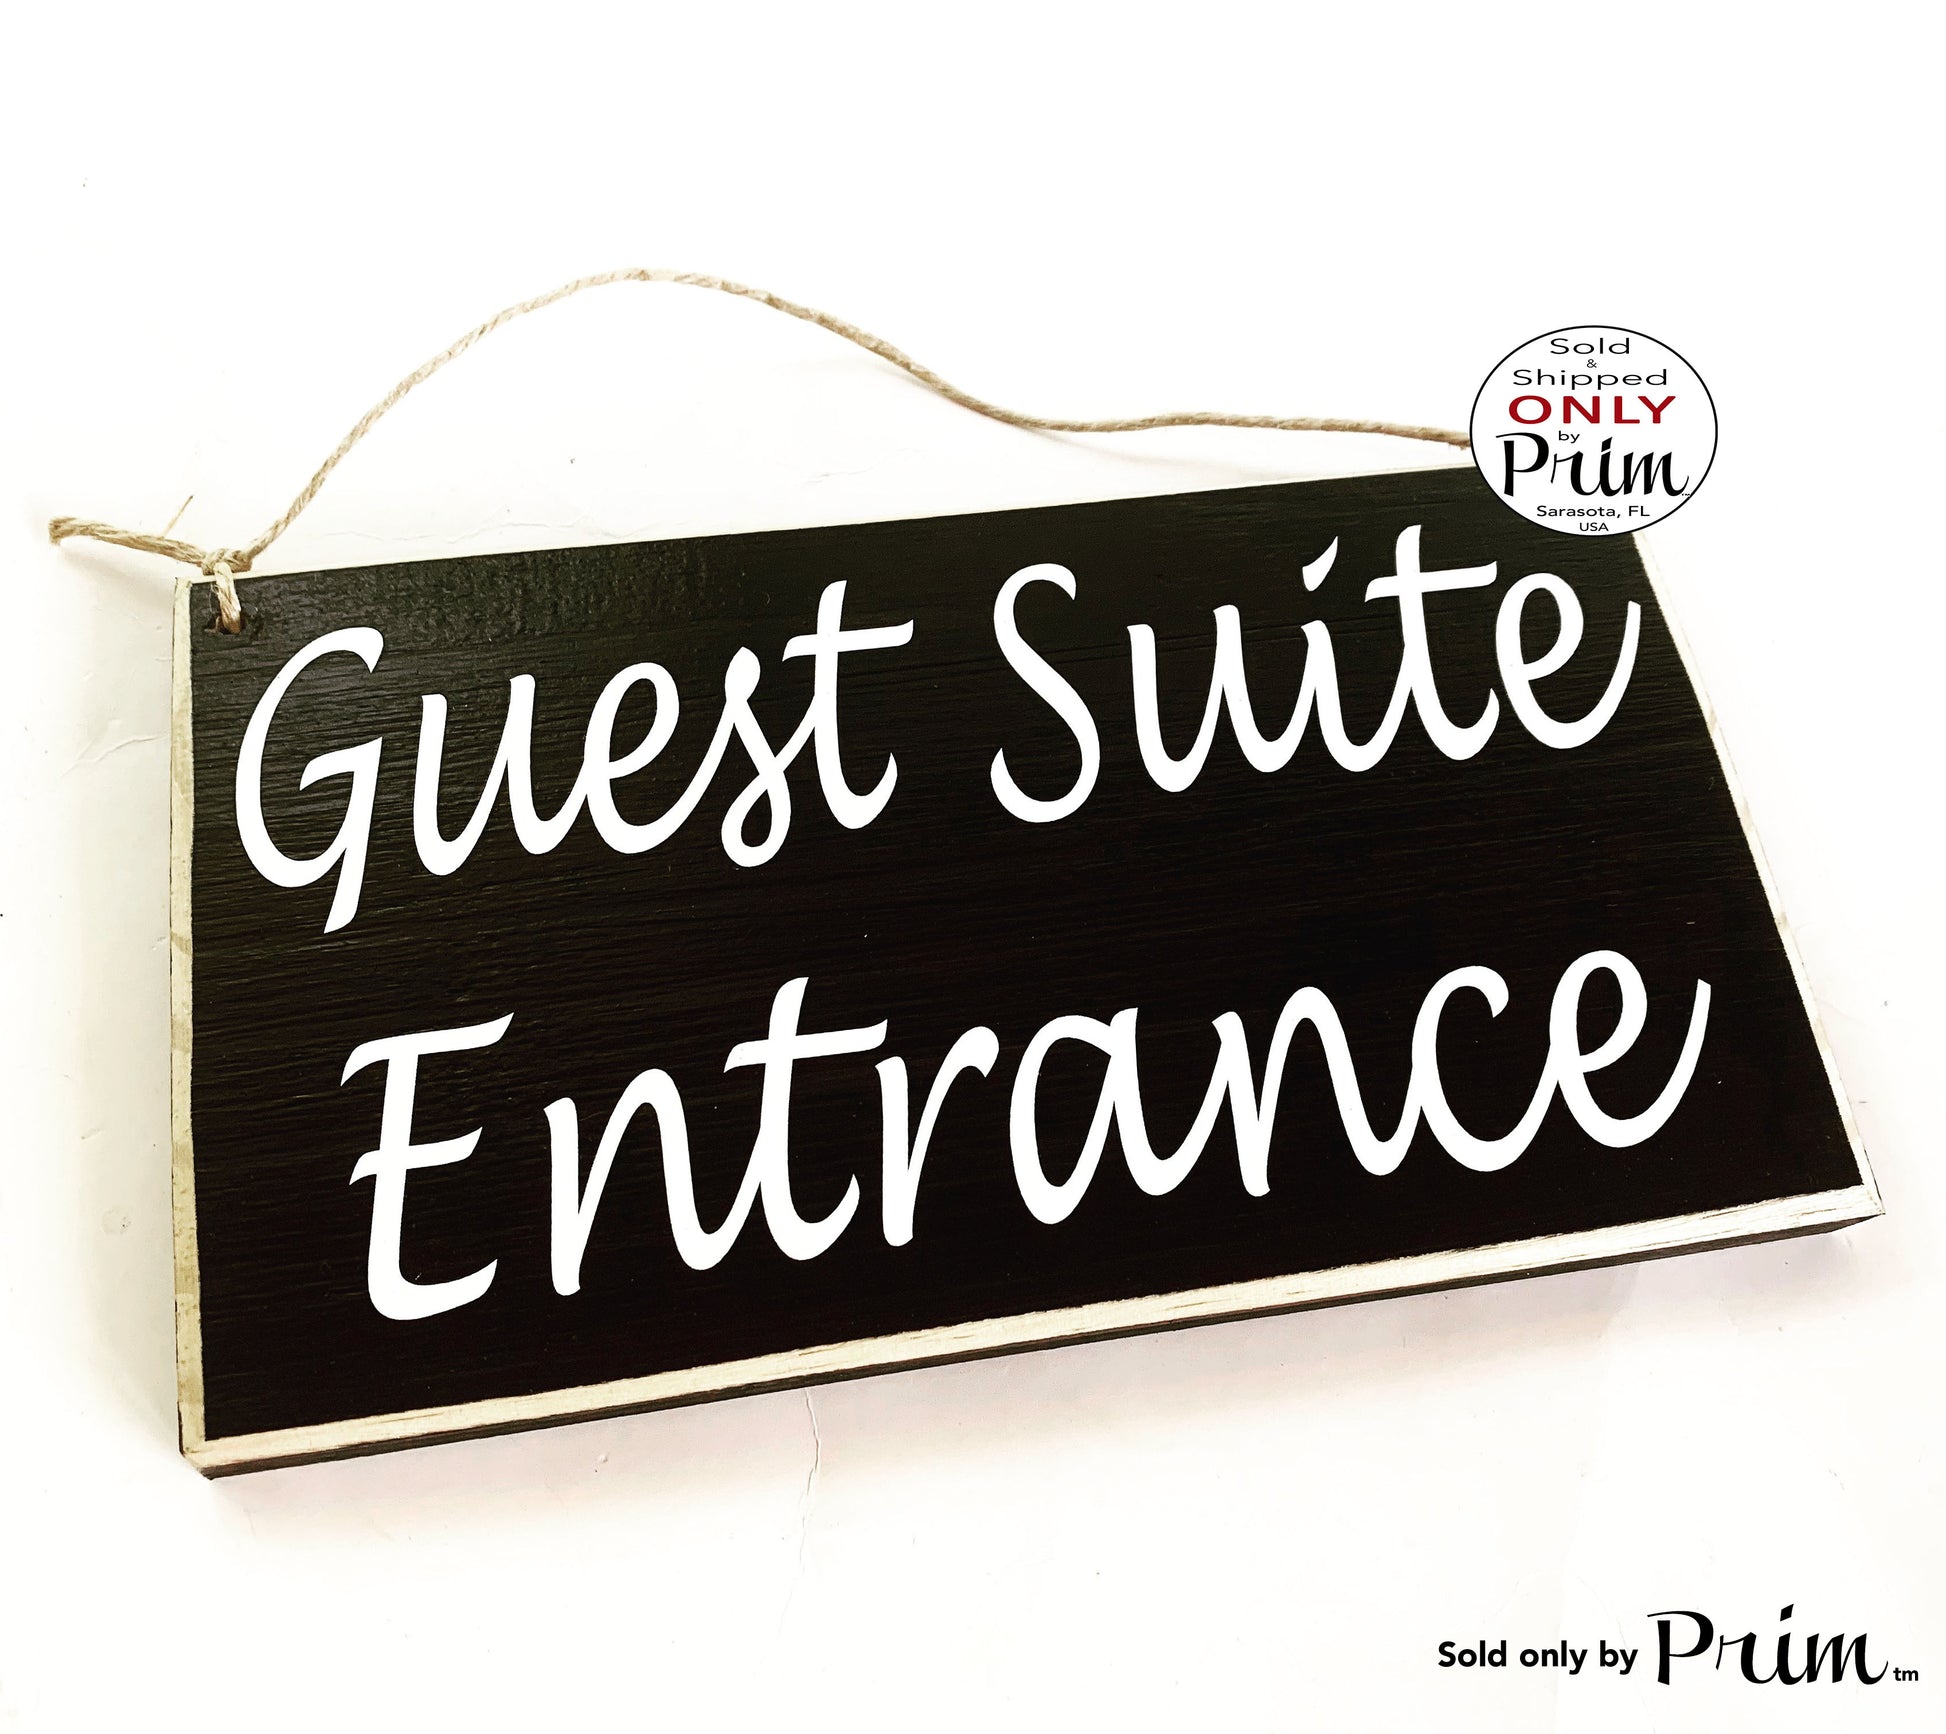 10x6 Guest Suite Entrance (Choose Color) Custom Wood Sign Welcome Suite Cottage Bed and Breakfast Bnb Lodging Resort